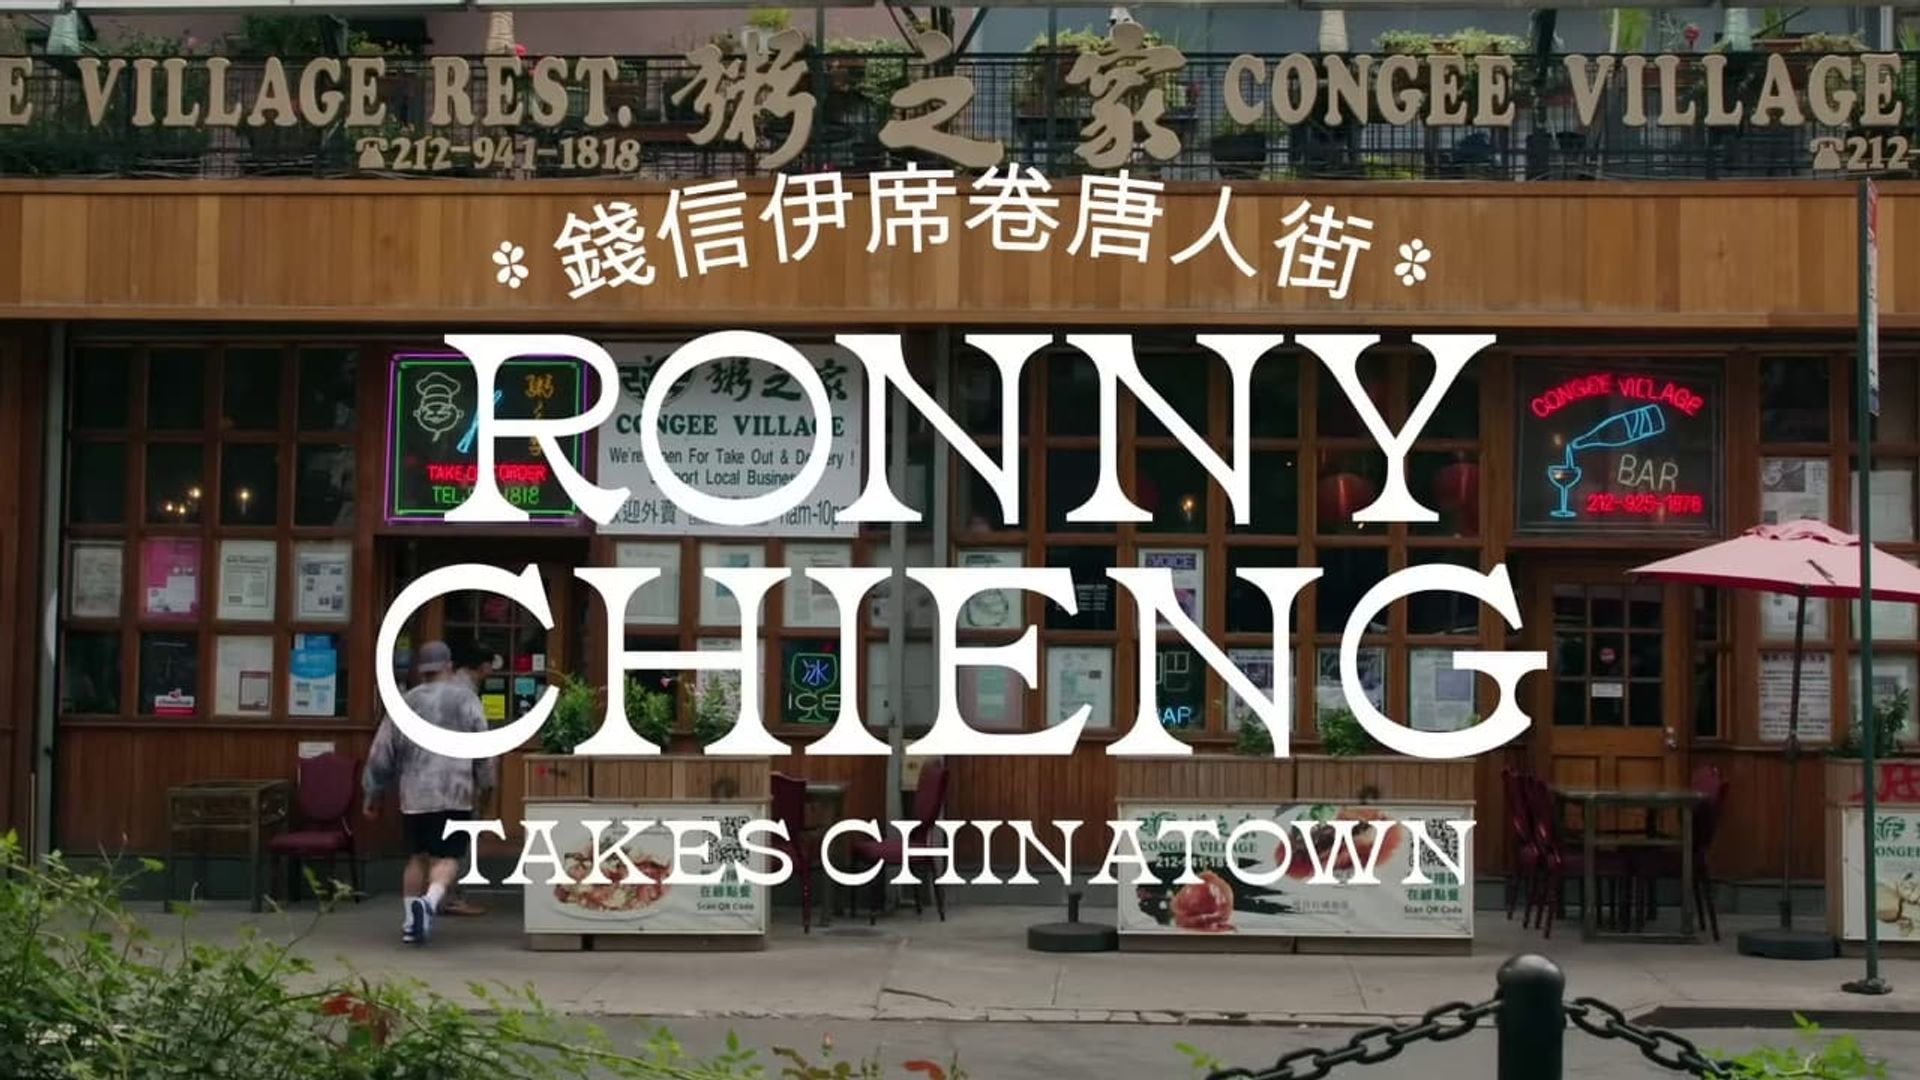 Ronny Chieng Takes Chinatown background